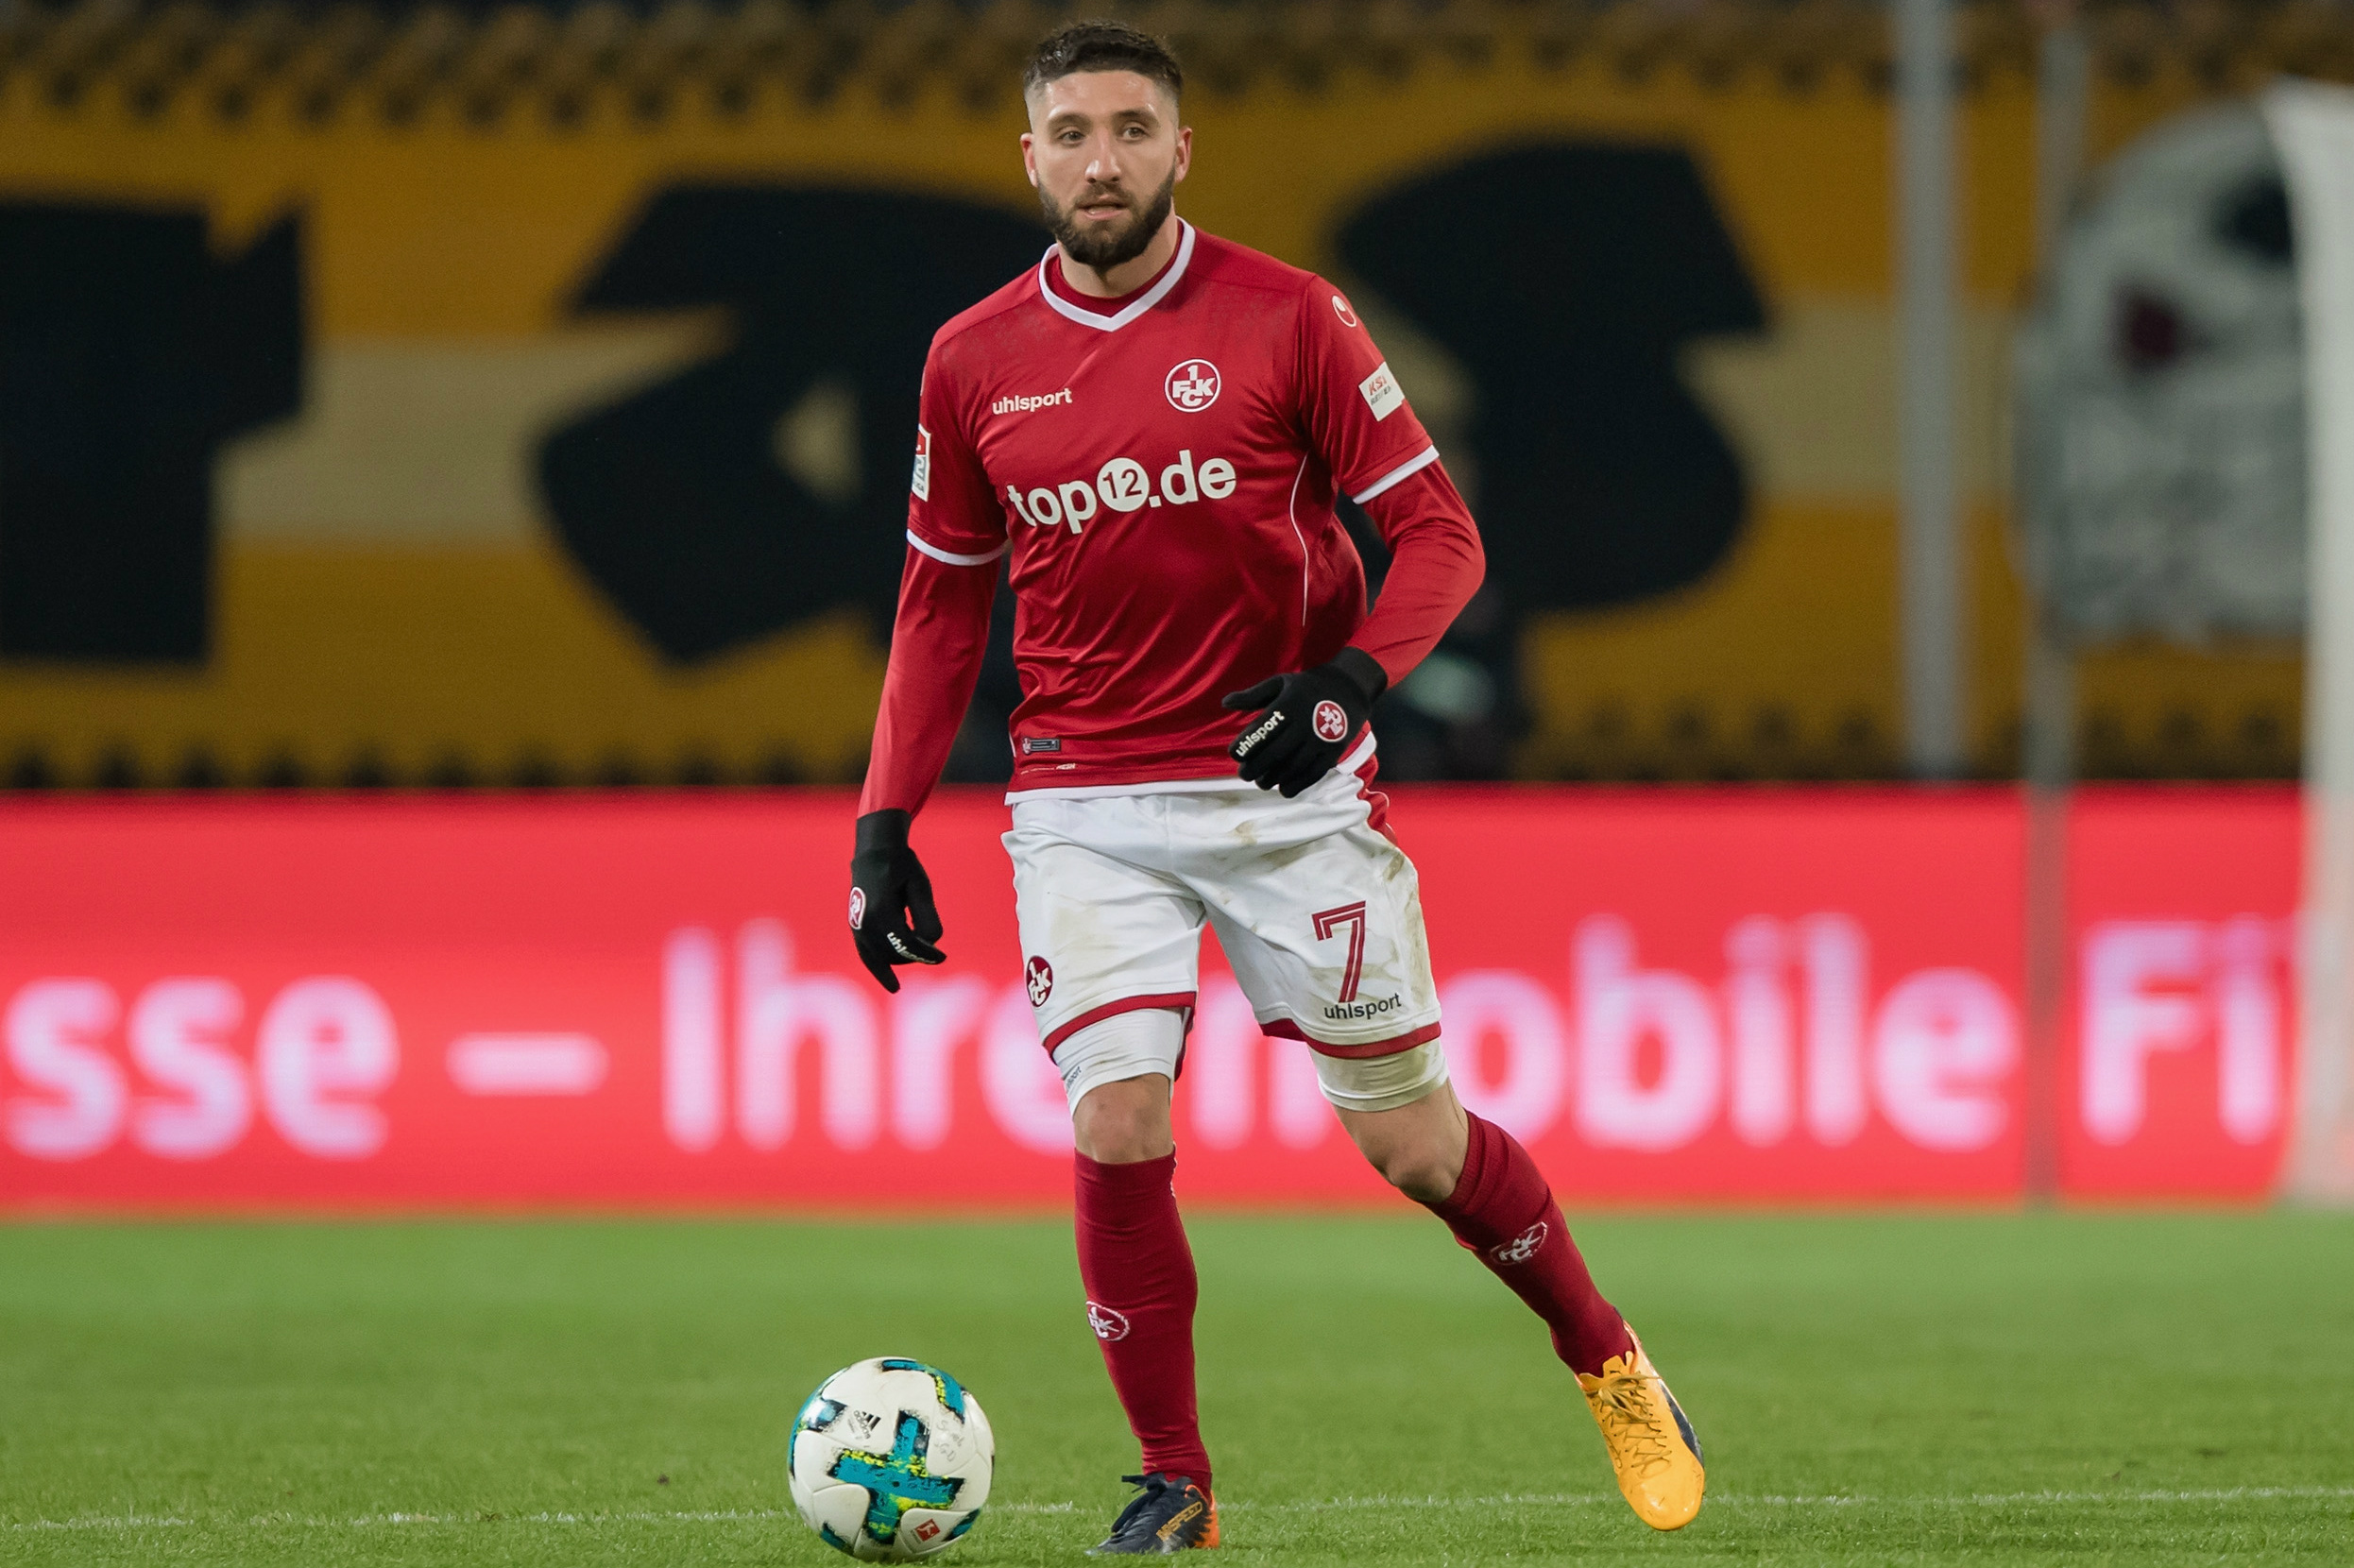 Aussies Abroad: Borrello scores first goal in Germany | Socceroos